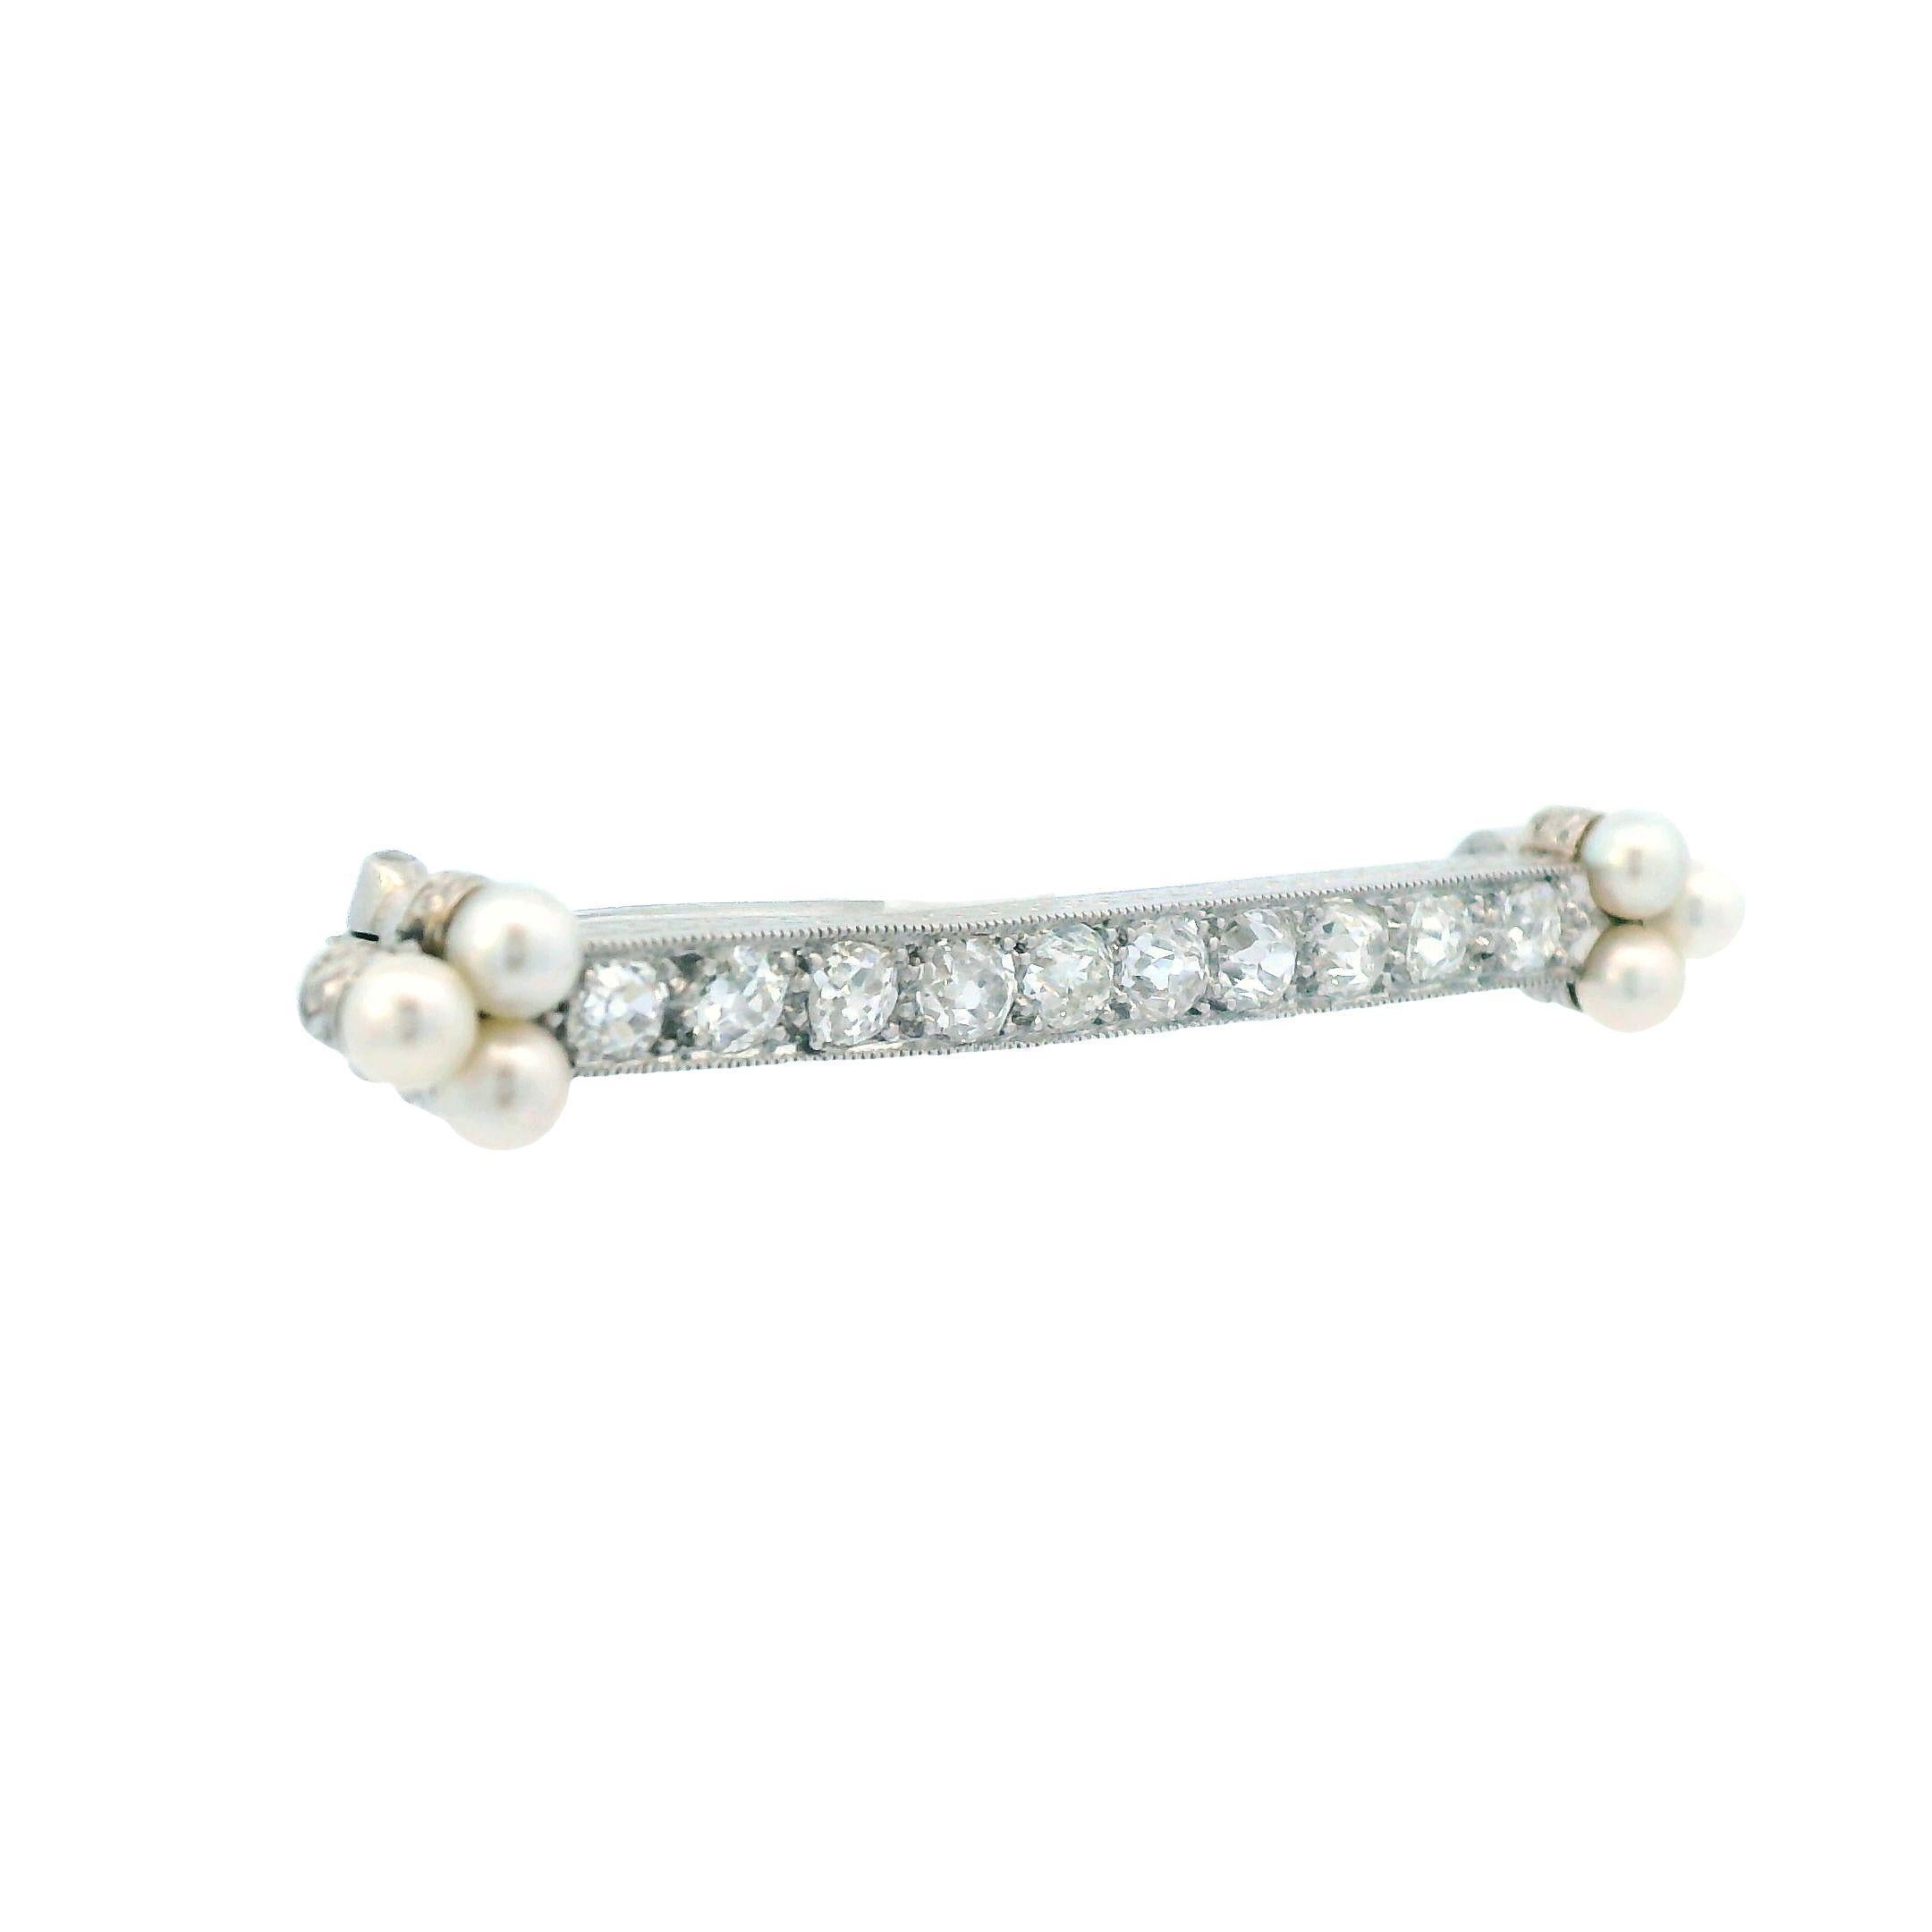 1910 Edwardian Platinum Diamond and Pearl Brooch For Sale 2